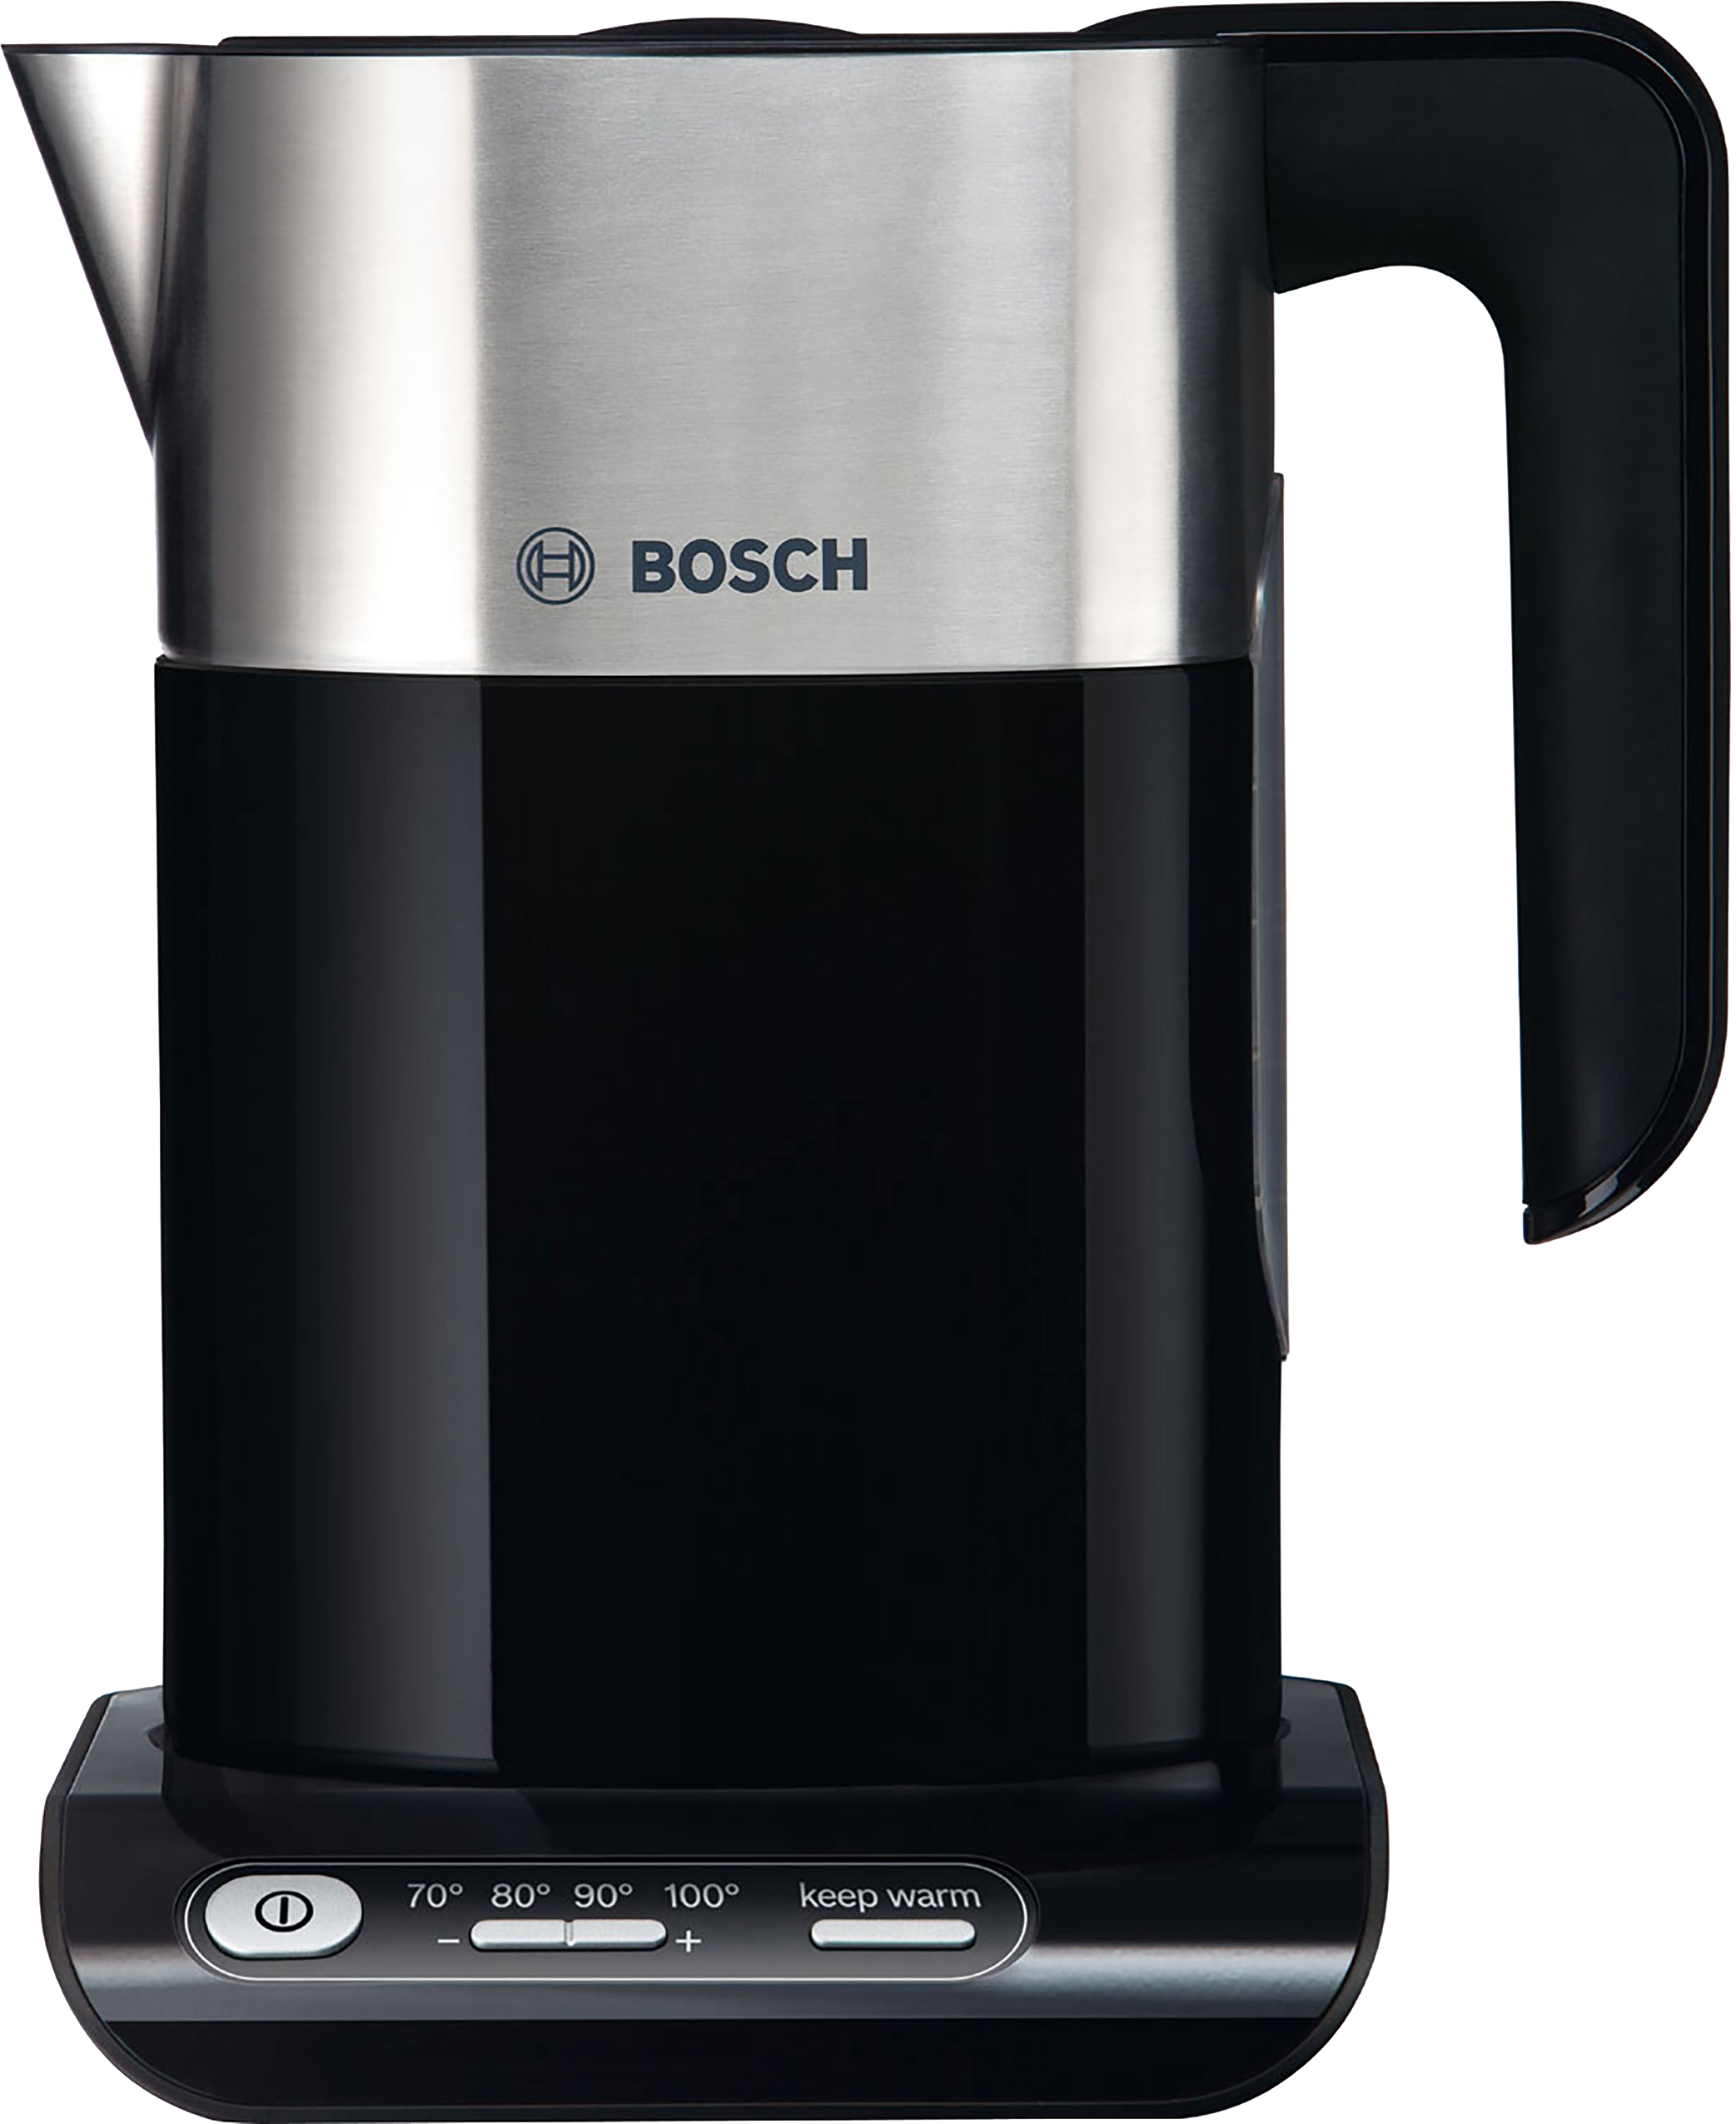 Bosch Styline TWK8633GB Kettle with Temperature Selector - Black / Stainless Steel